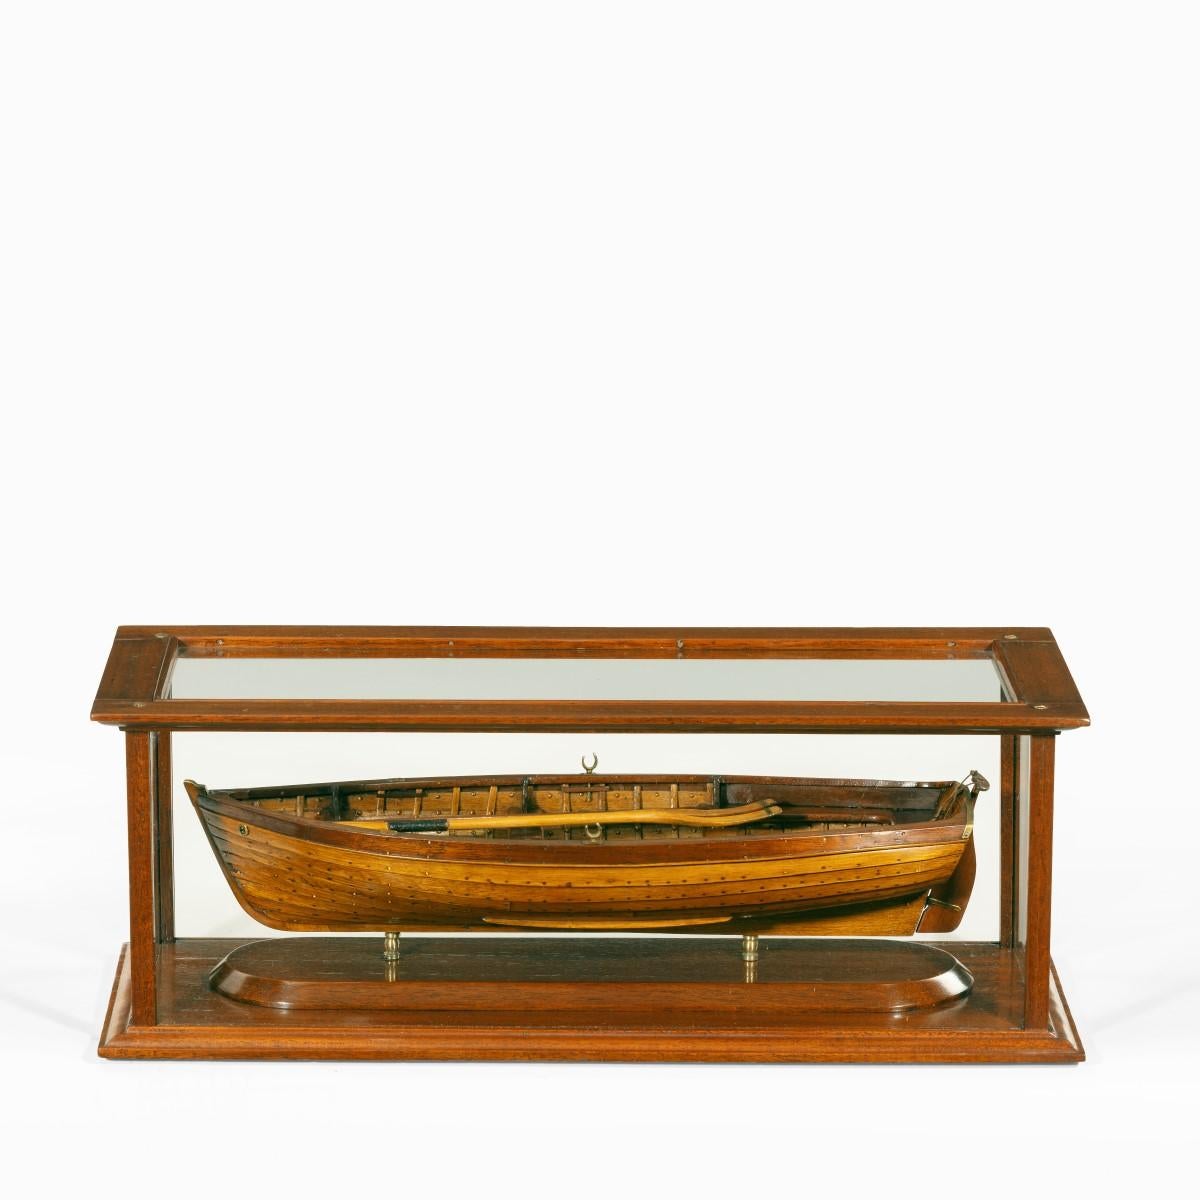 An Edwardian clinker-built model of a gentleman’s yacht tender, with a boat hook and oars, teak gratings, mahogany seats and thwarts, the rudder with a yoke, brass rowlocks and rubbing strake to the stern, within a glass case. English, circa